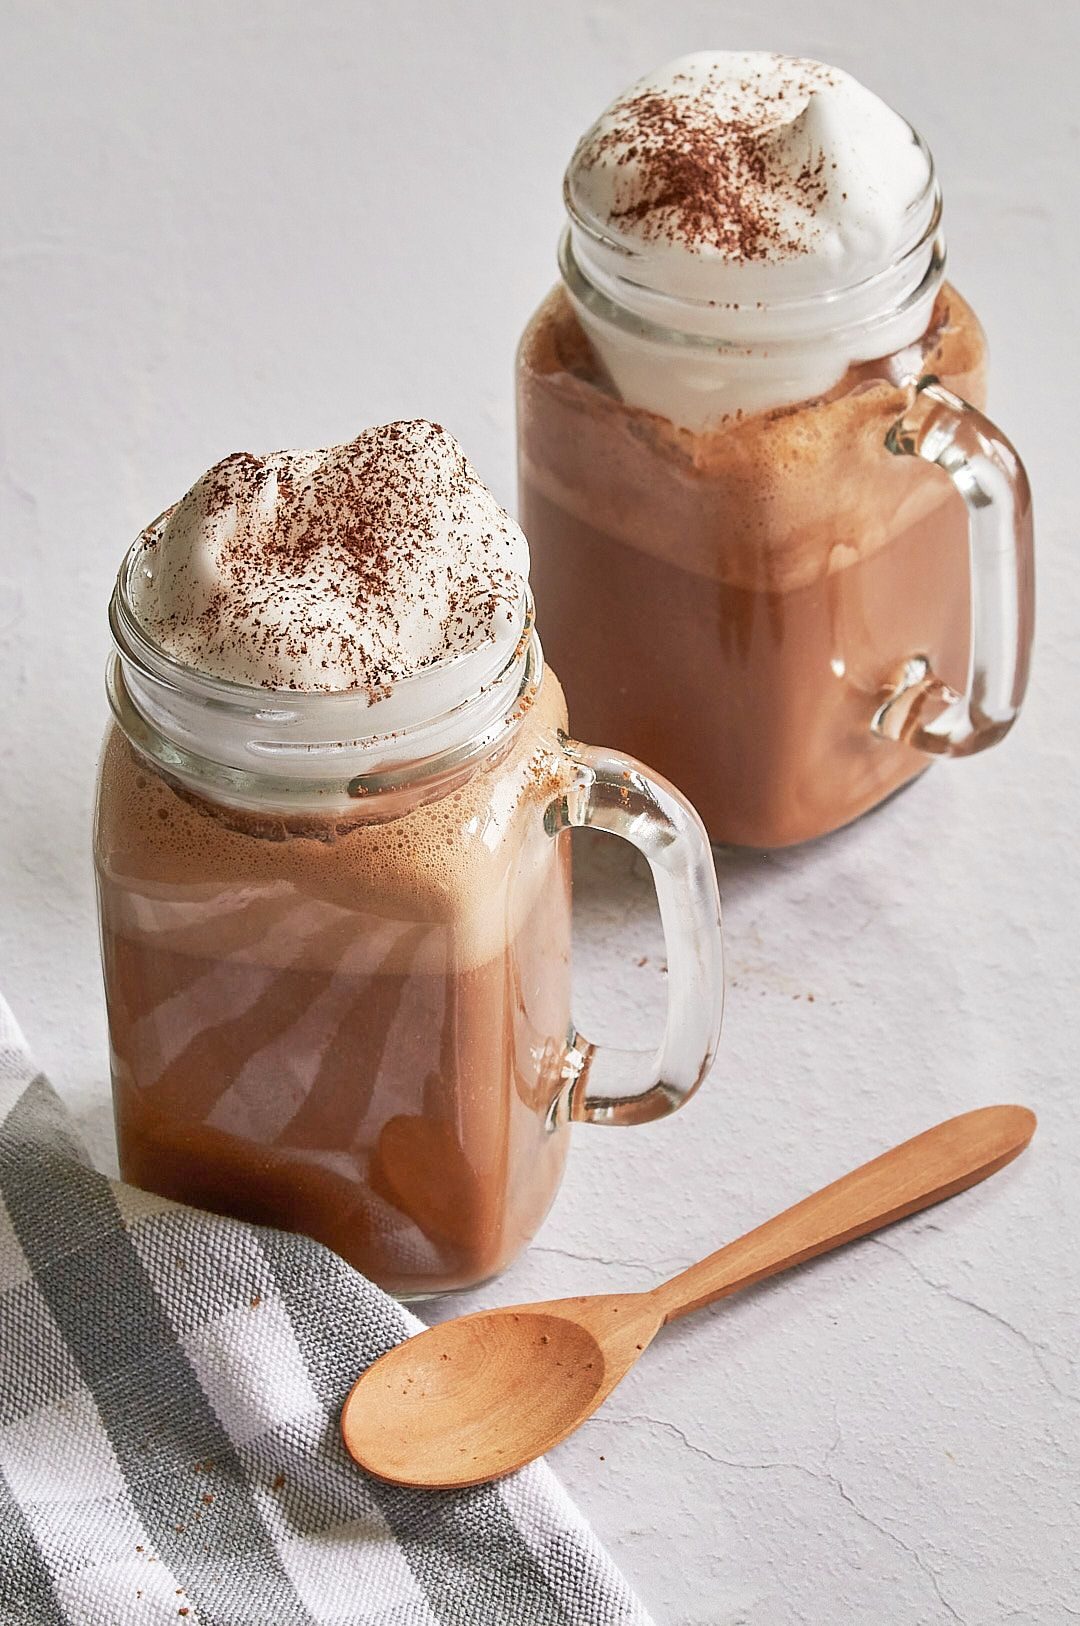 Two clear glass mason jar mugs with hot chocolate with whipped cream dripping on top with a wooden spoon in front of them and a grey and white checkered towel in bottom left corner.